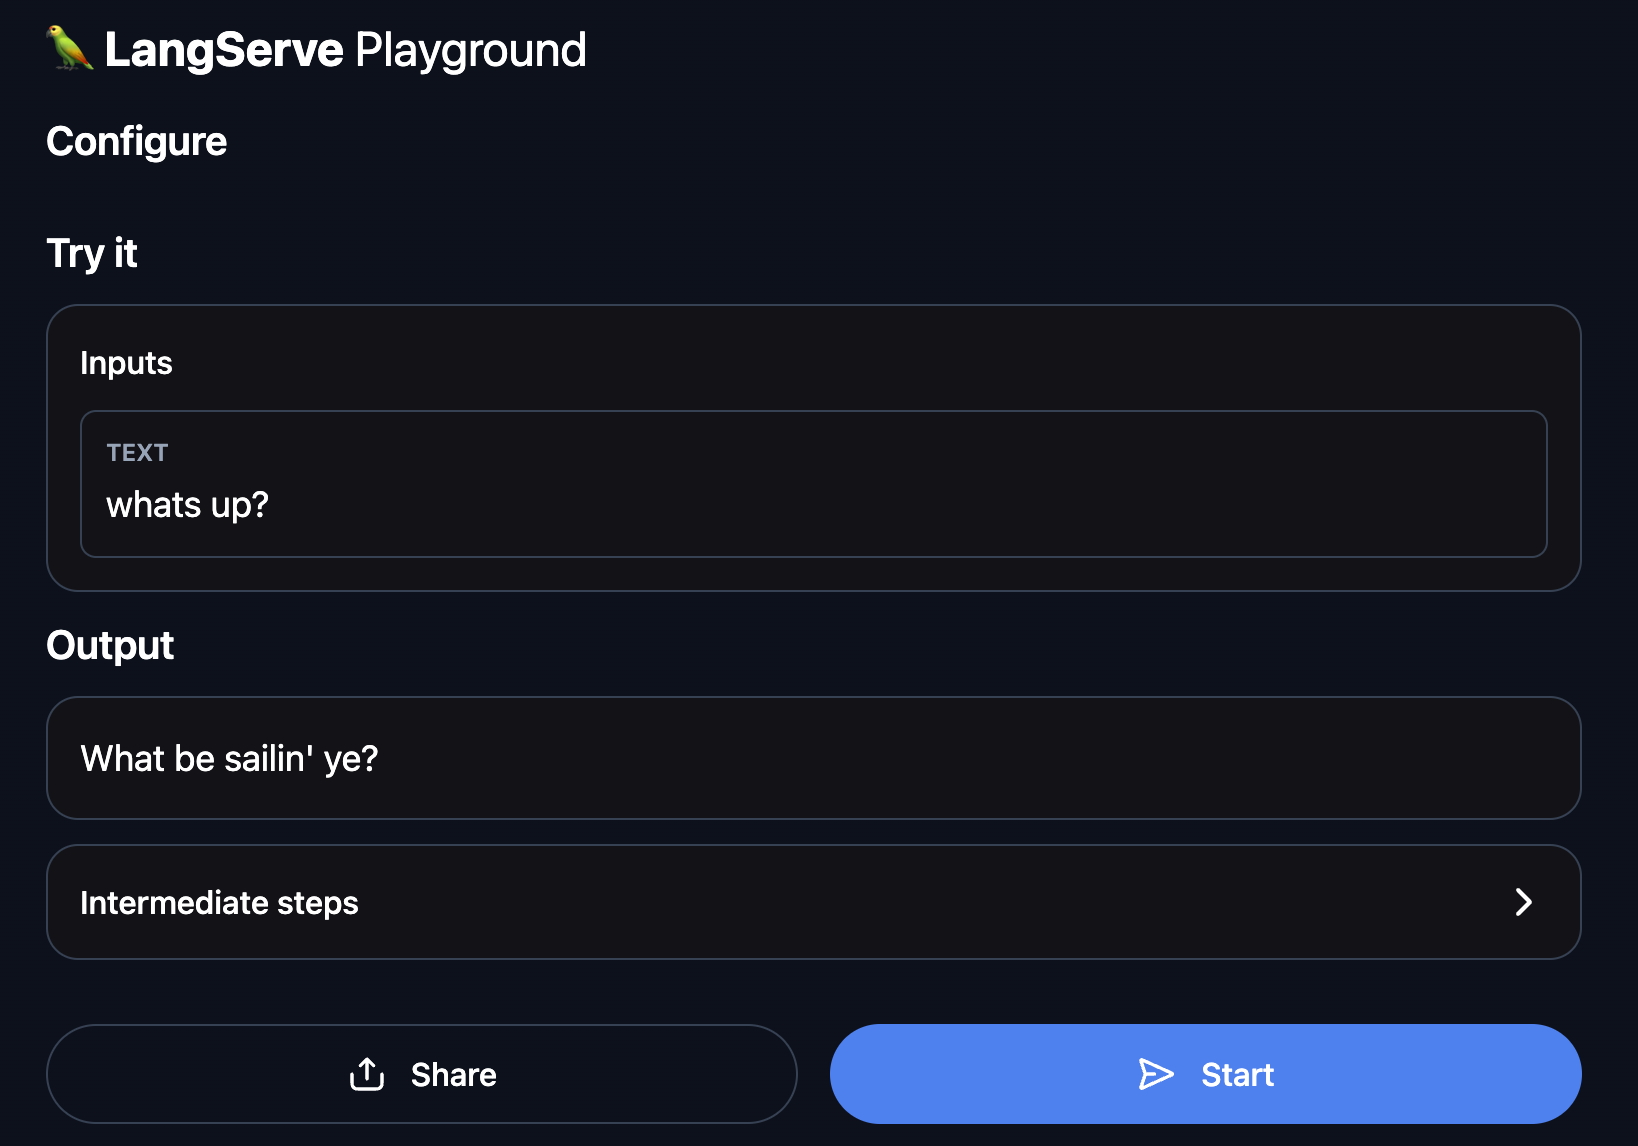 Screenshot of the LangServe Playground web interface with input and output fields.